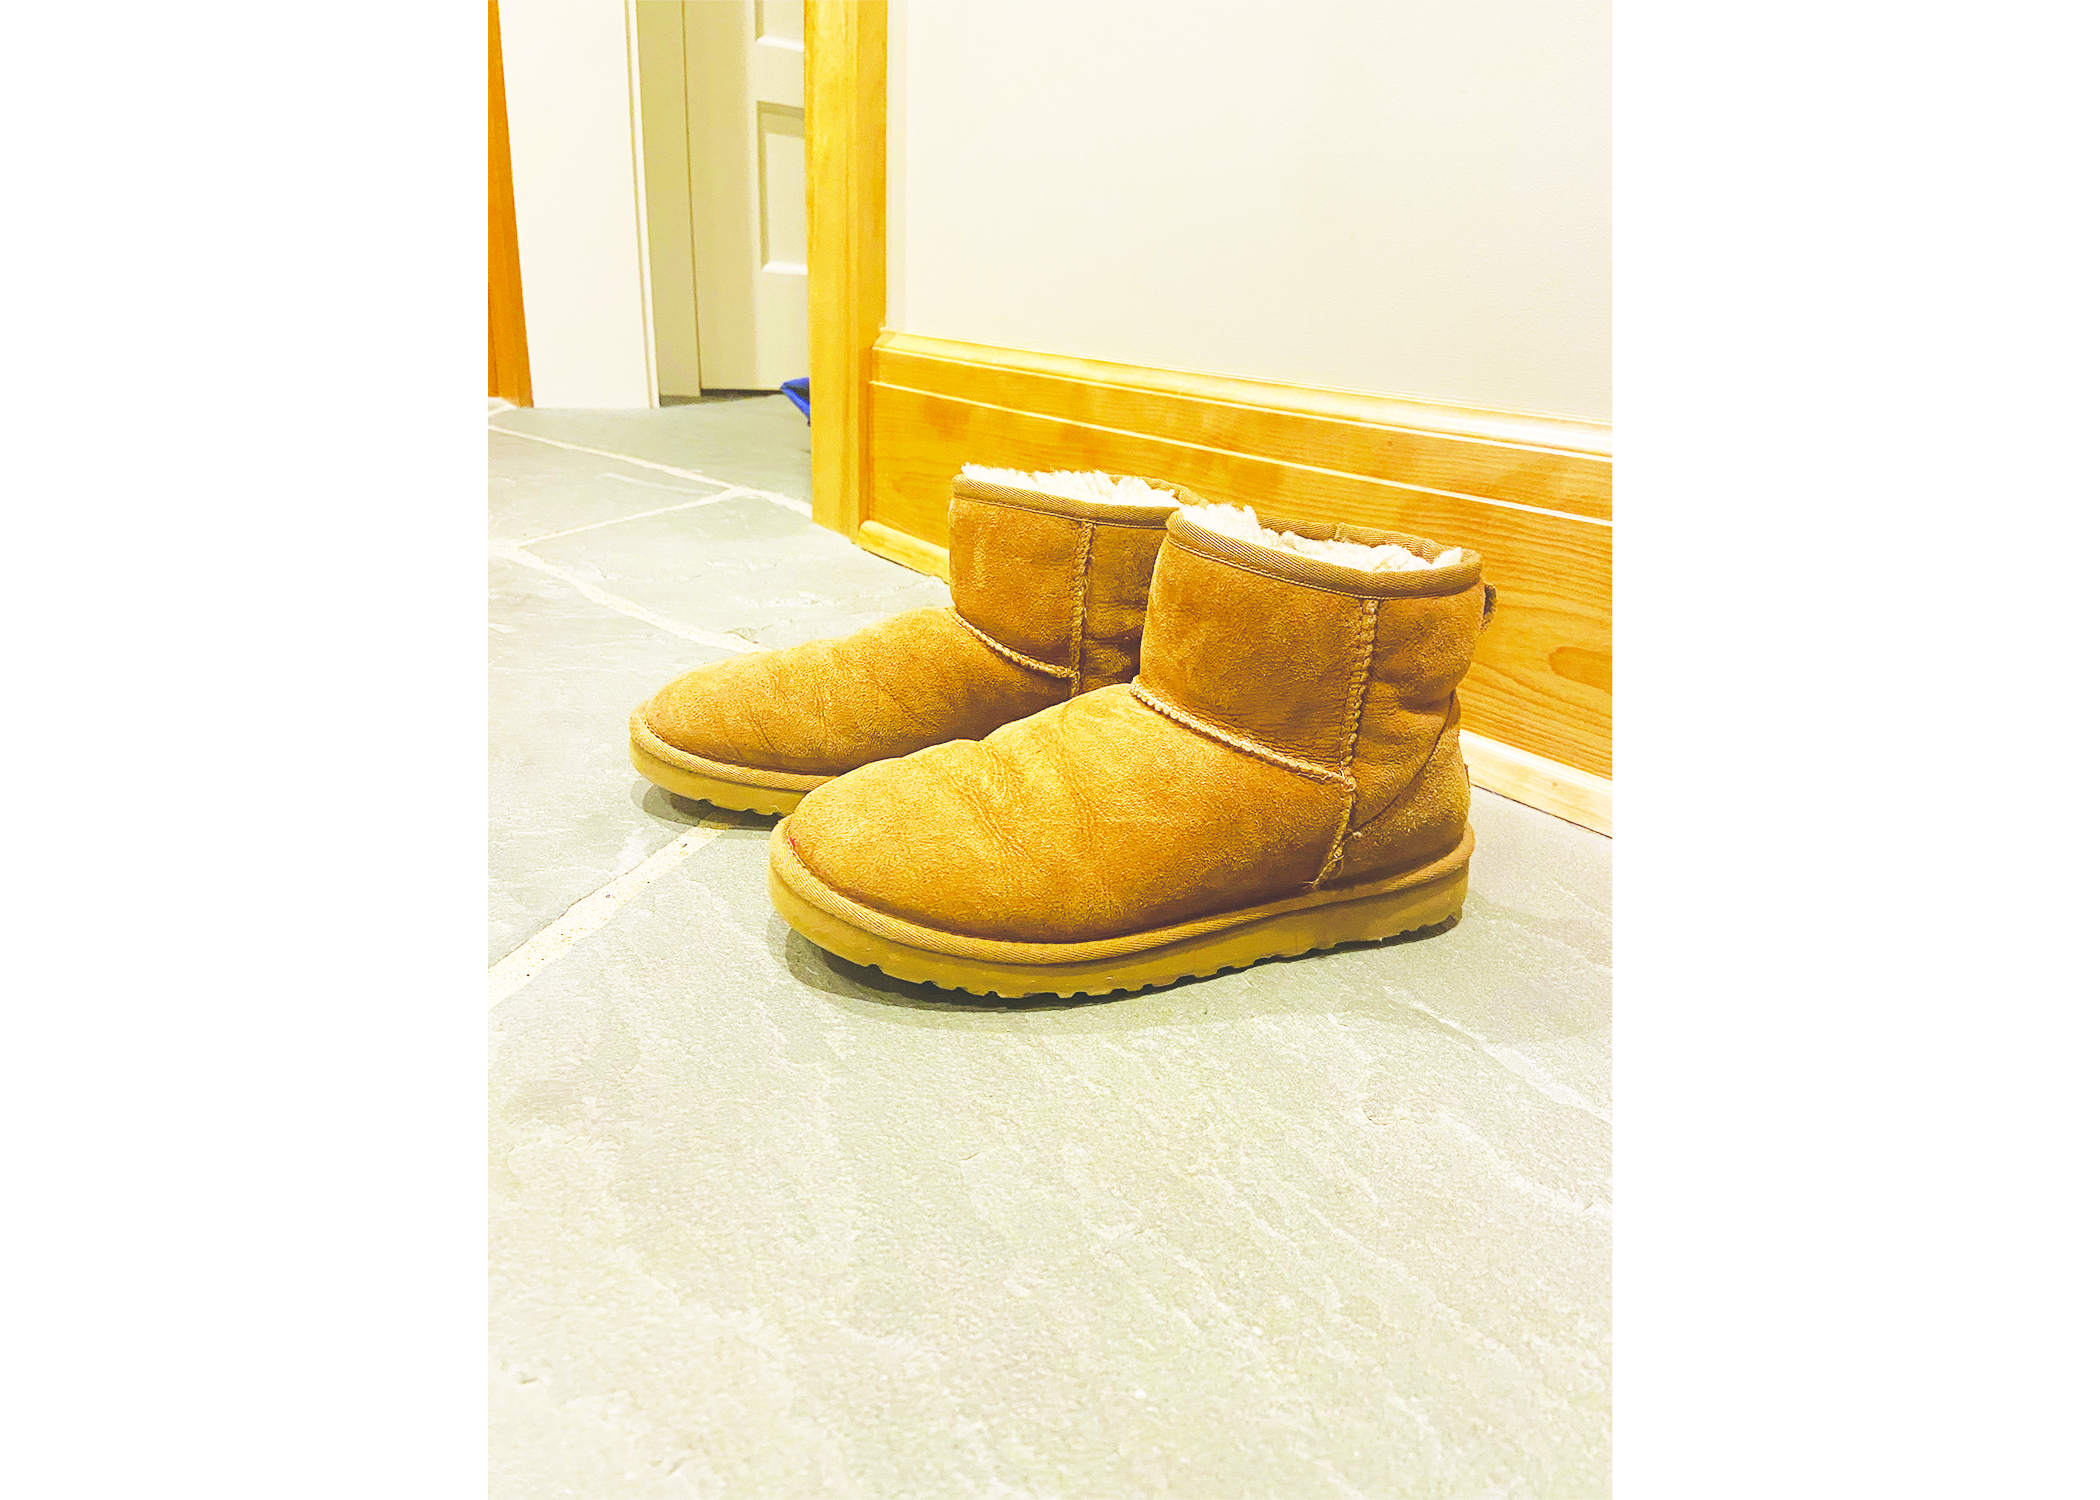 The Ugg boot began as
a popular surfing shoe
in Australia during the
1960s; however, the style
of the boot, with sheep-
skin and leather is said to
have been created in the
1800s. The name “Ugg”
didn’t exist until the
1960s. Now these boots
have become a winter
staple, perfect for loung-
ing around in or going to school in.